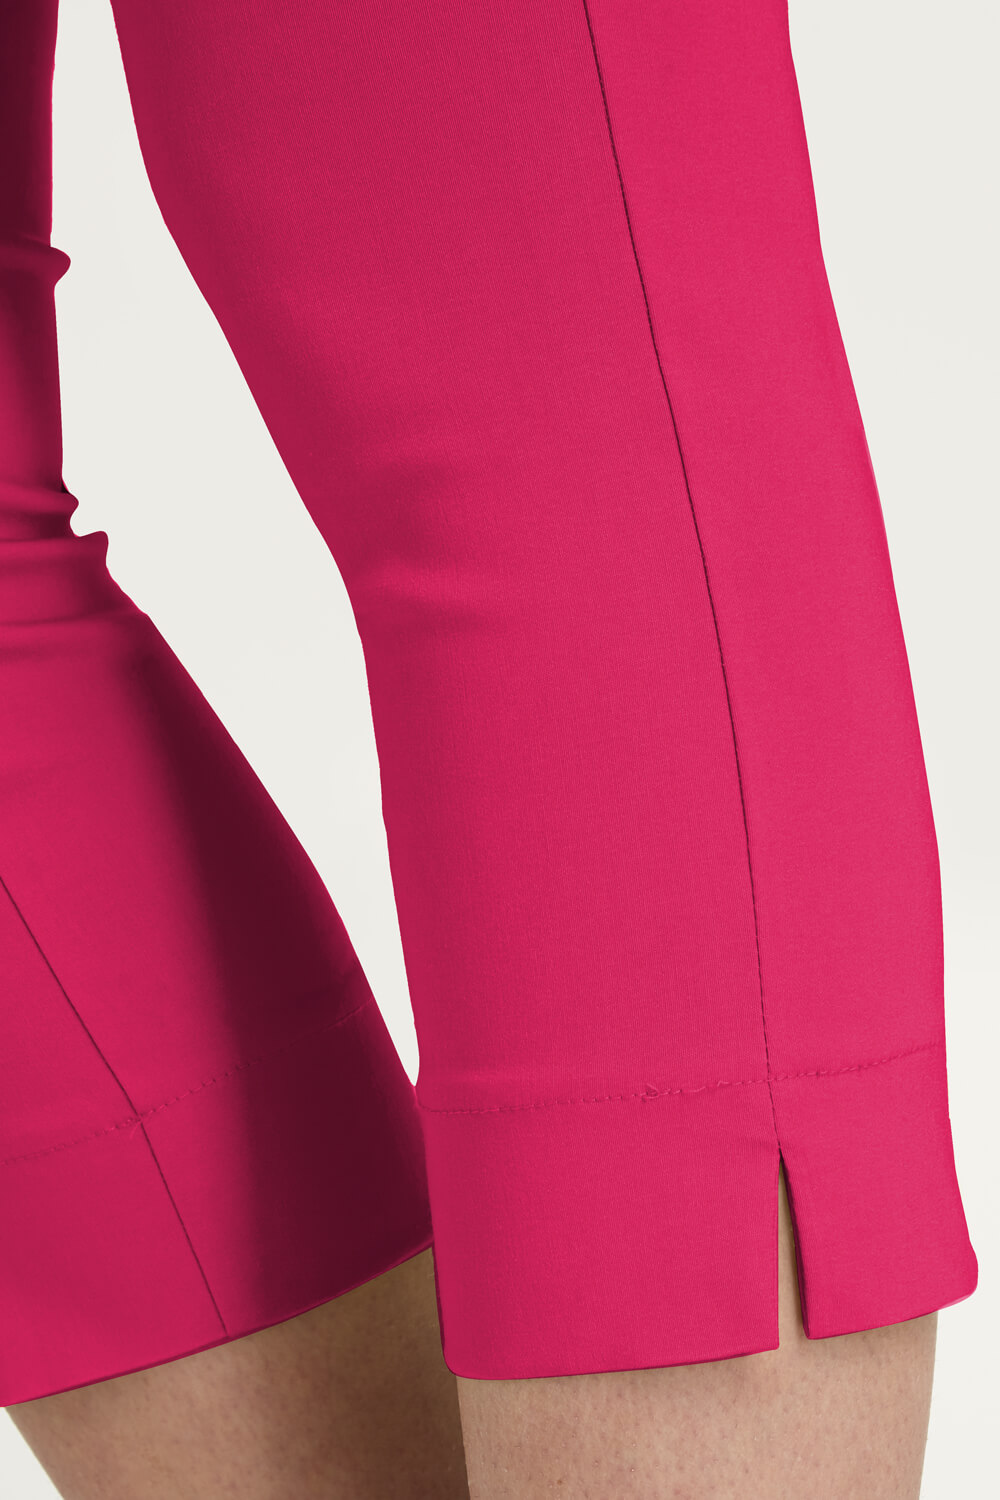 Fuschia Pink Cropped Stretch Trouser, Image 3 of 7